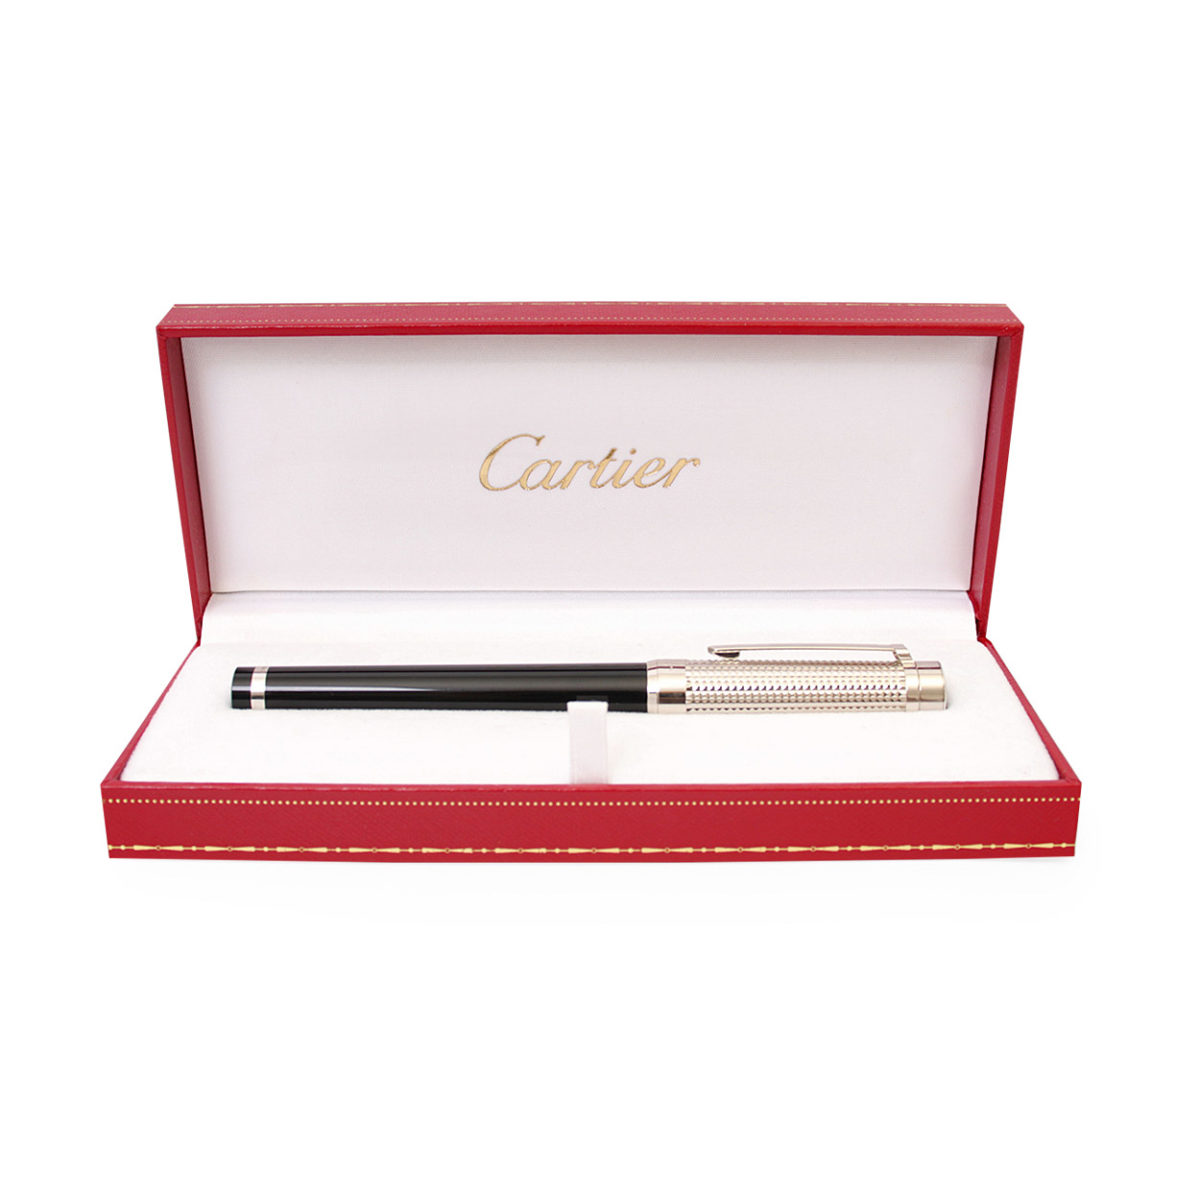 cartier pen in red box